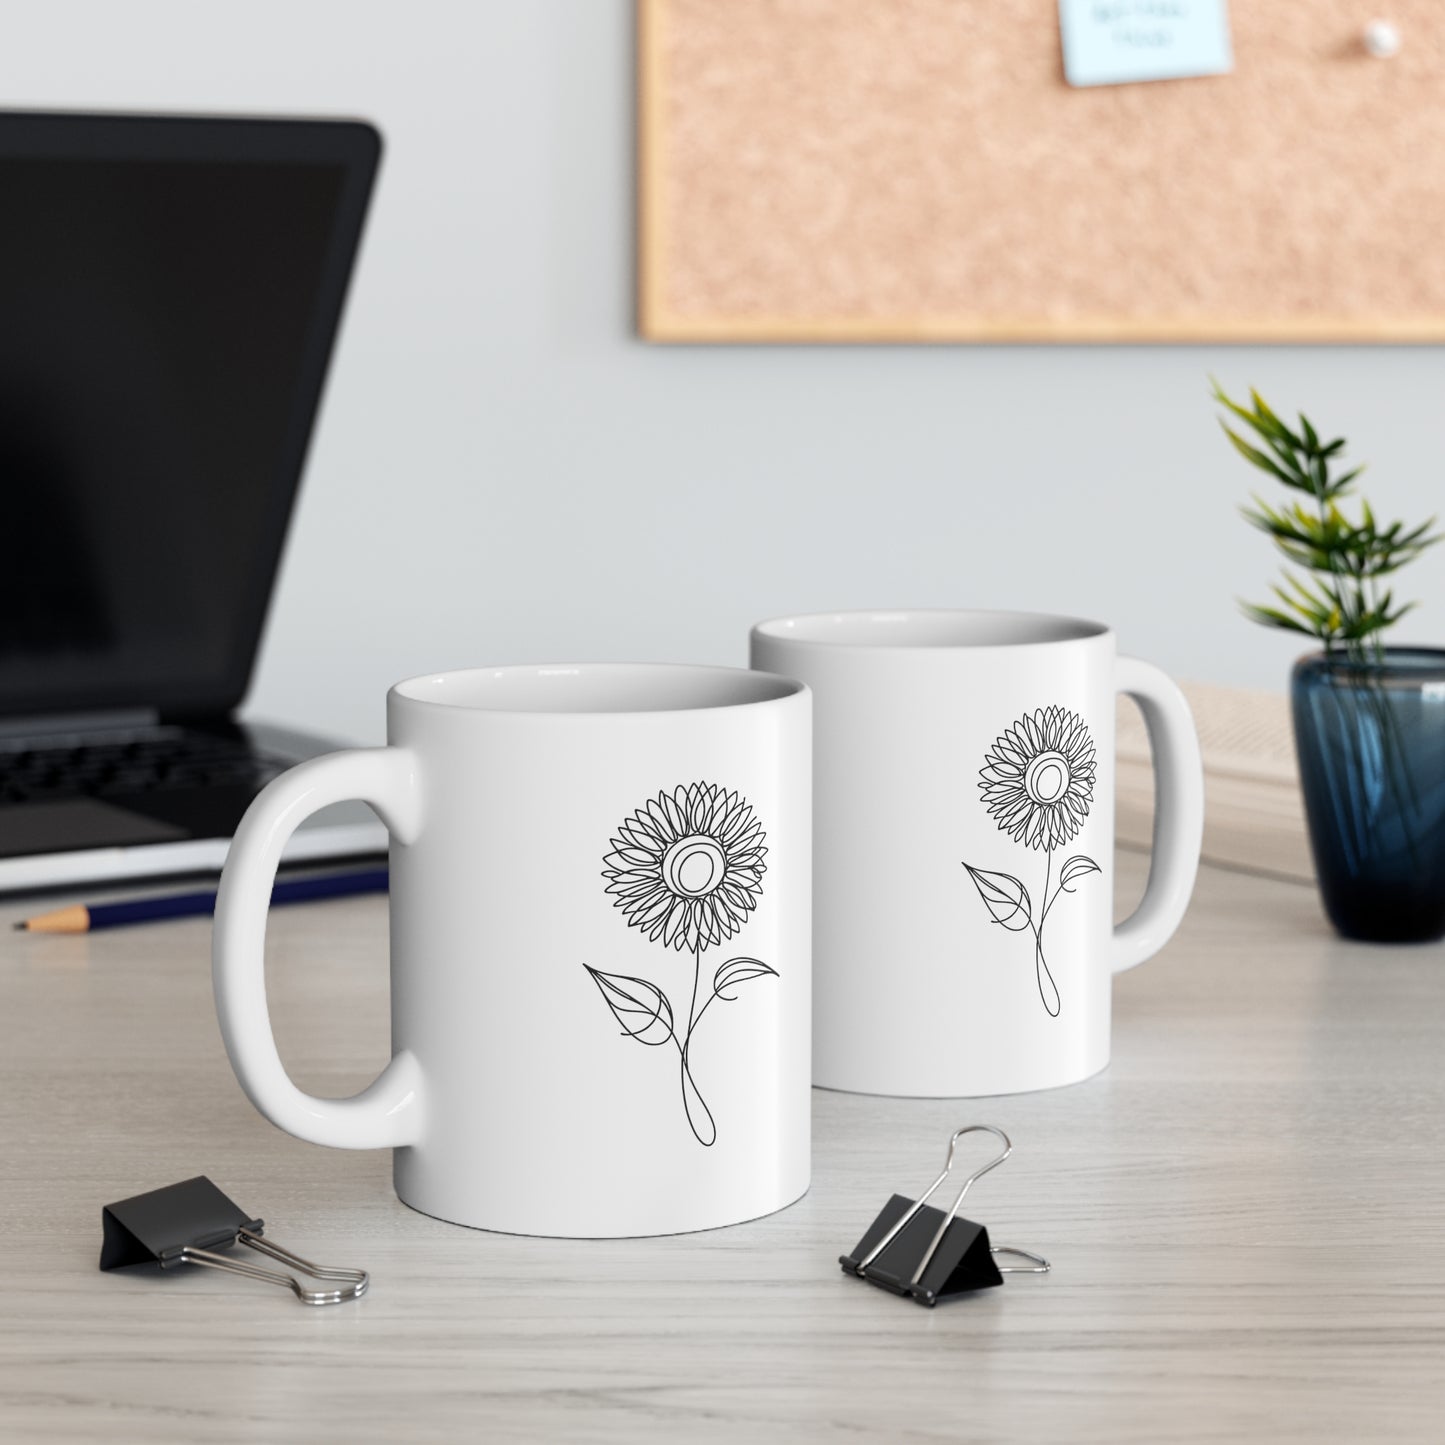 Sunflower Line Drawing - "The Continuous Sunflower" | Coffee Mug